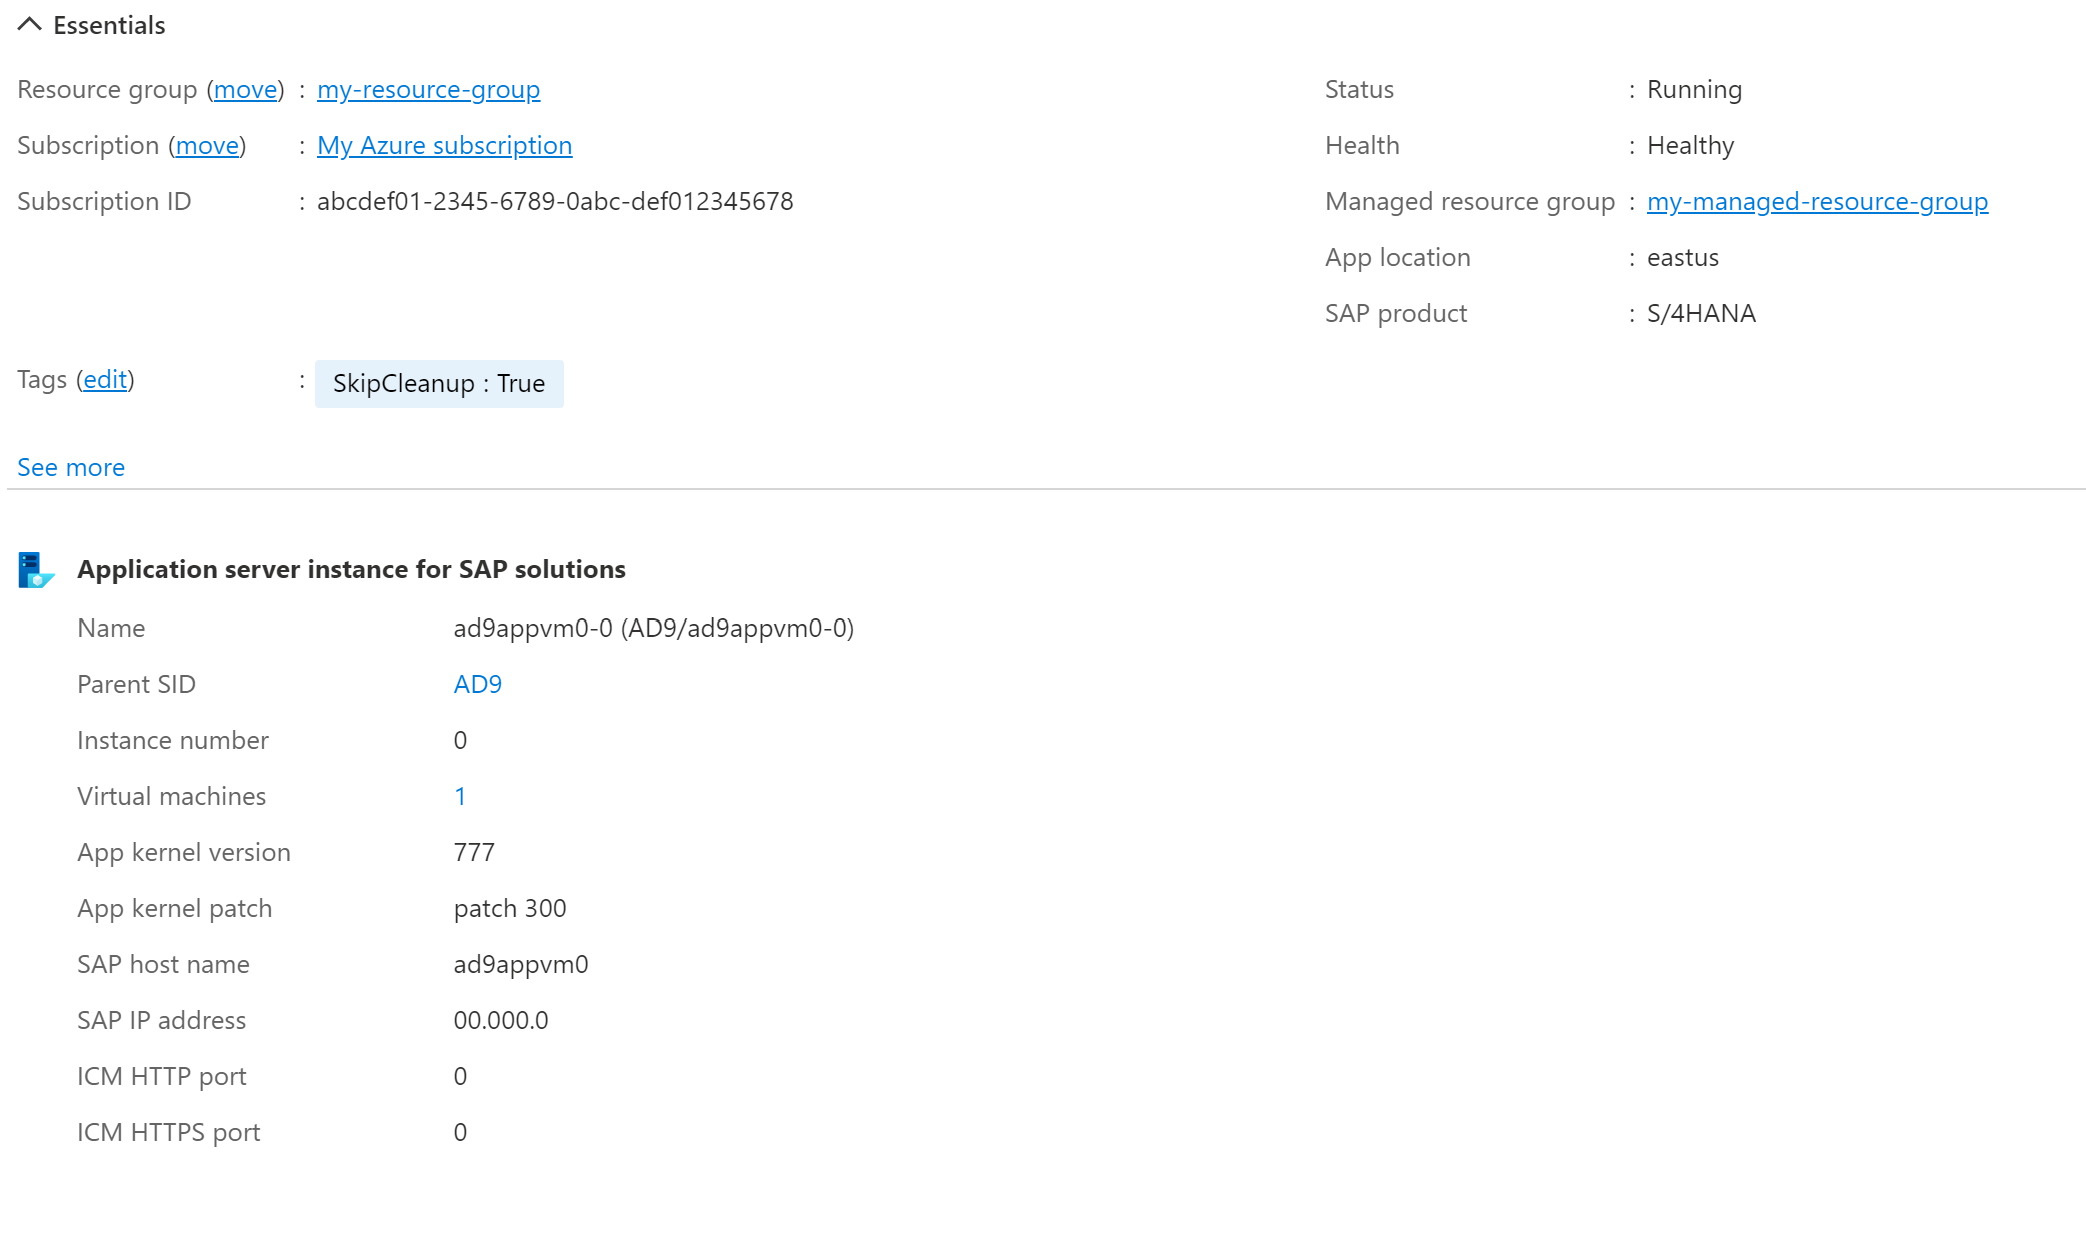 Screenshot of an Application Server instance in the Azure portal, showing health and status information for the VM.